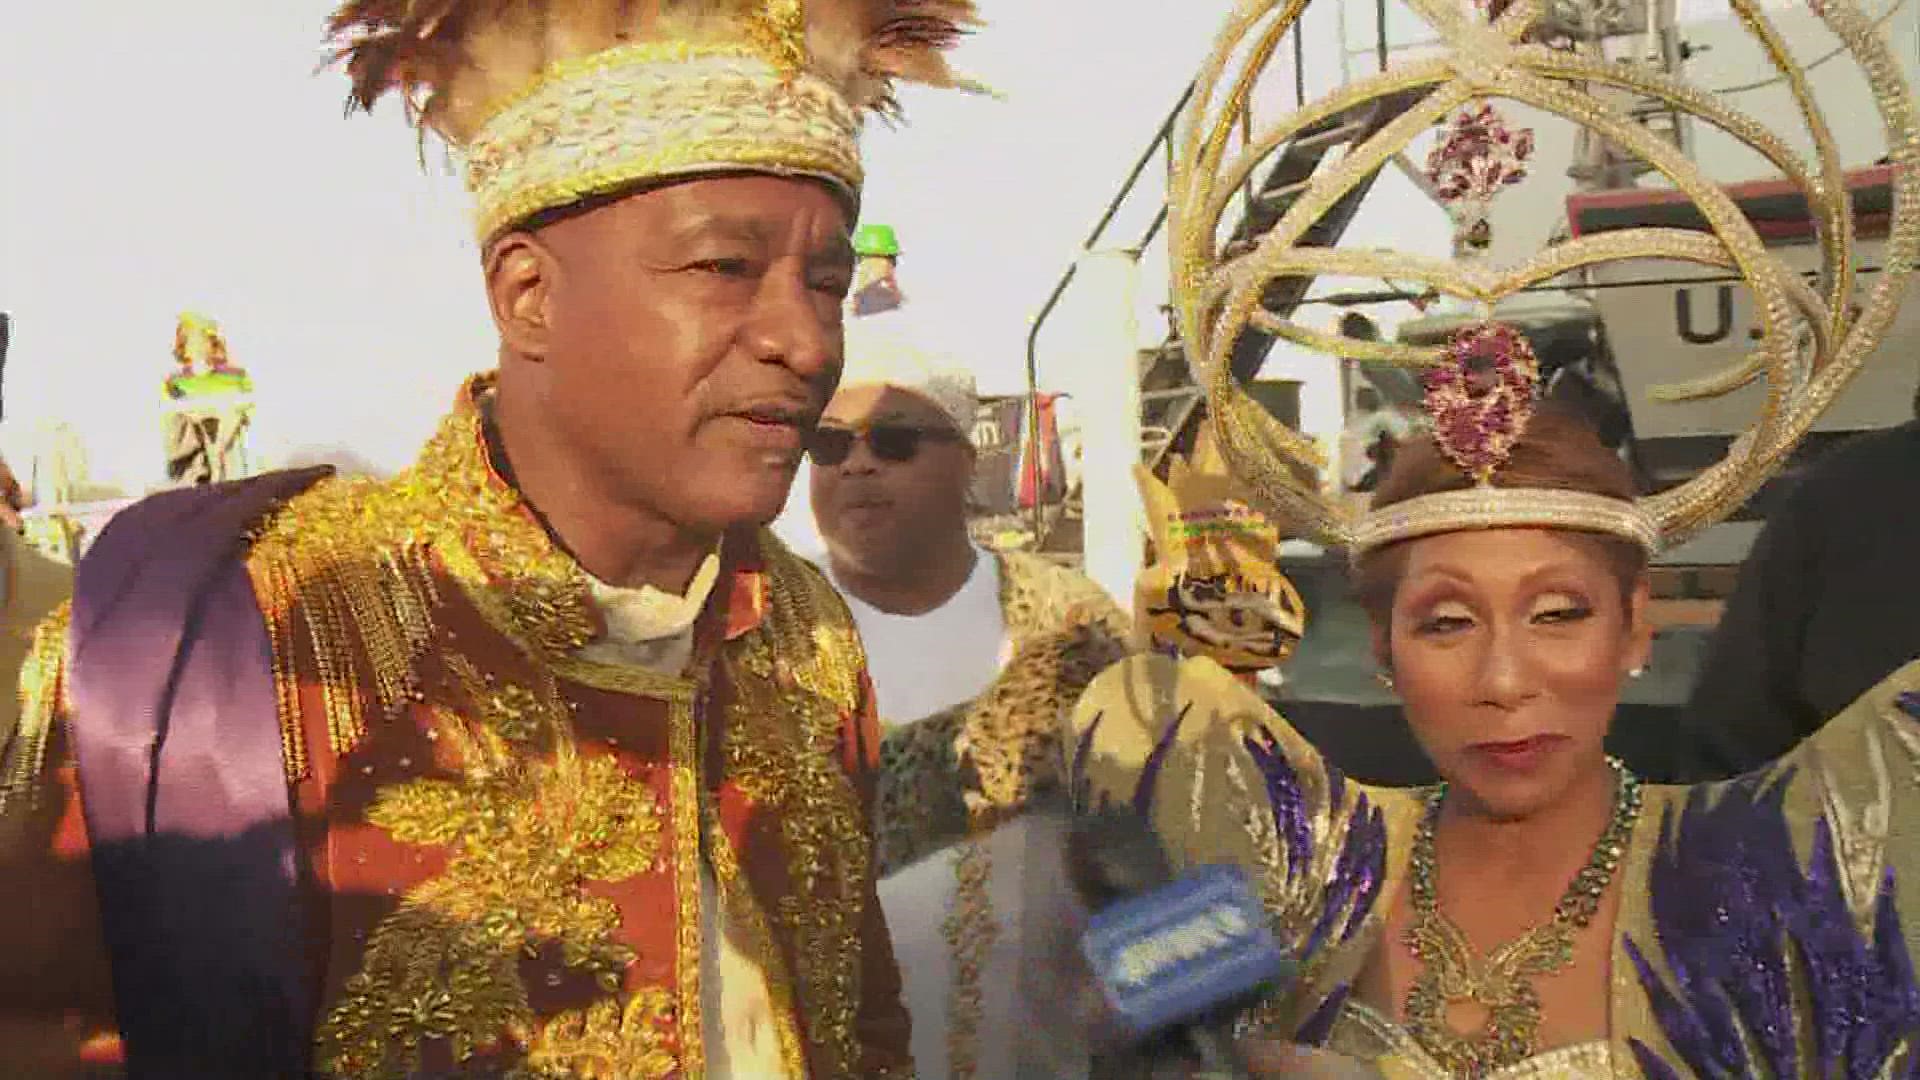 Zulu's royalty arrived at the New Orleans Riverfront Monday evening for the Lundi Gras celebration.